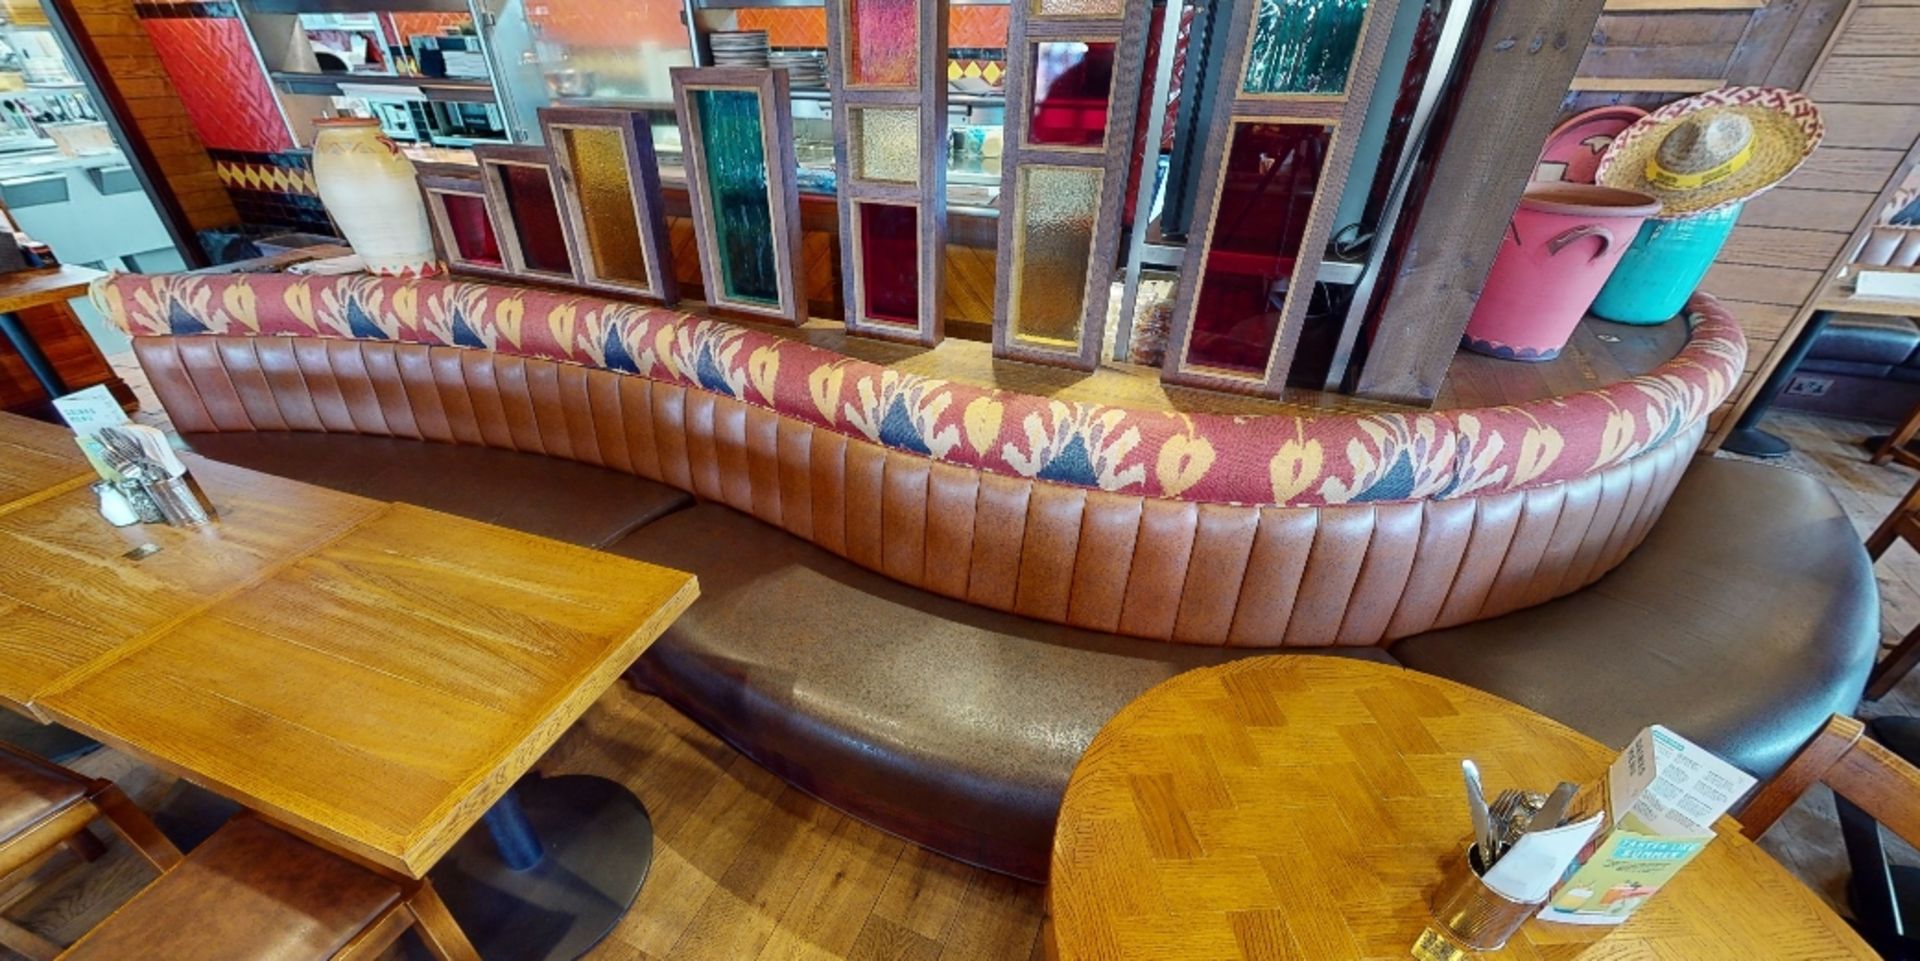 1 x Restaurant Curved Long Seating Bench - Features Brown Faux Leather Seat Pads and Light Brown - Image 5 of 7